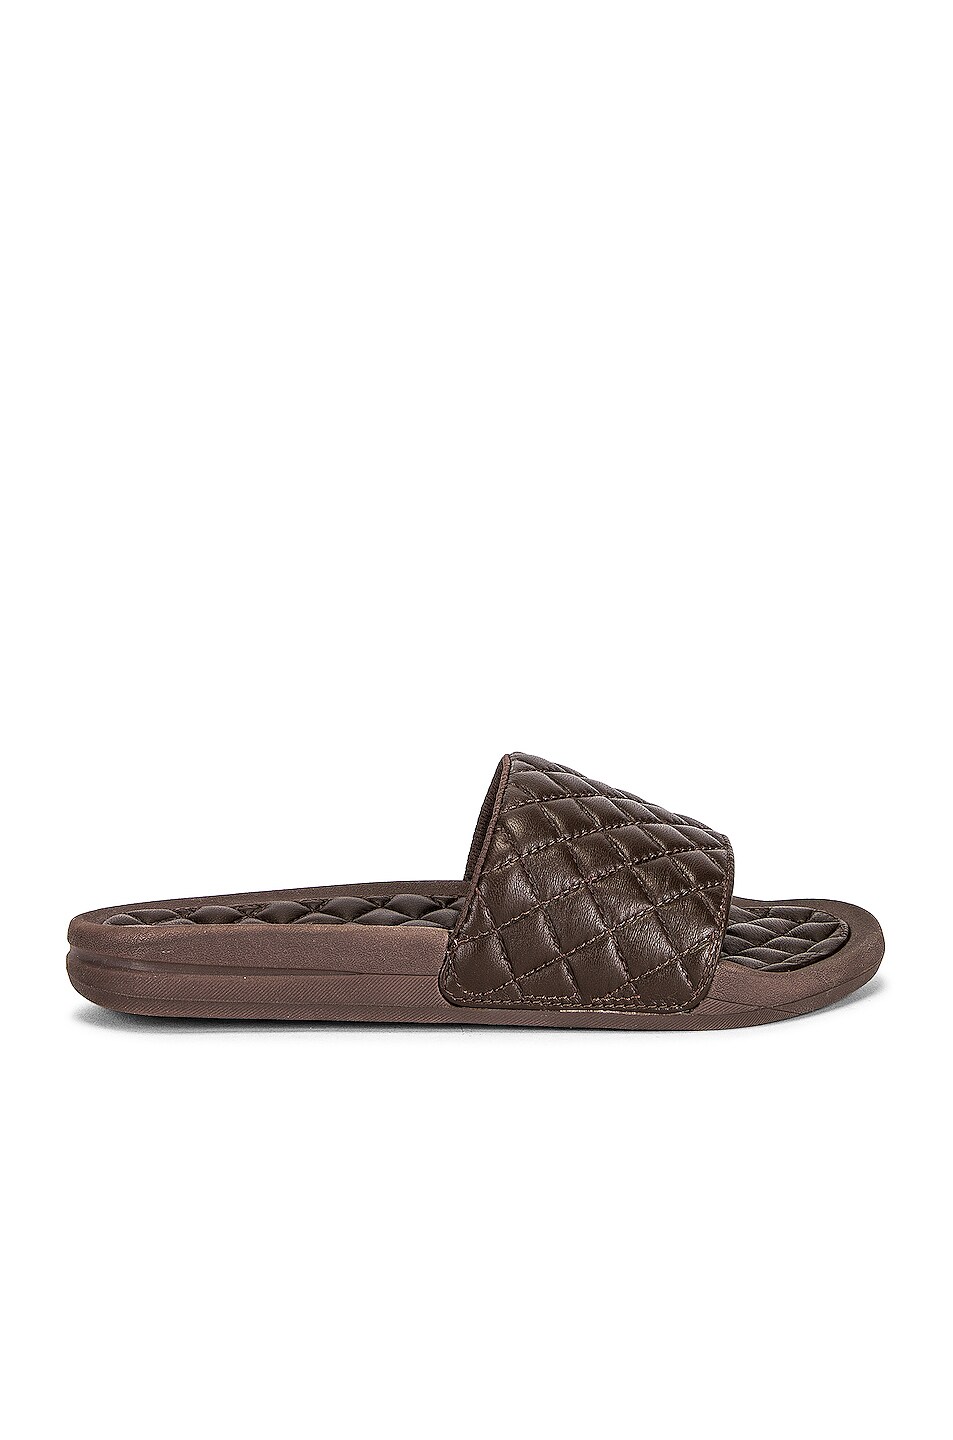 Image 1 of APL: Athletic Propulsion Labs Lusso Slide Sandal in Chocolate